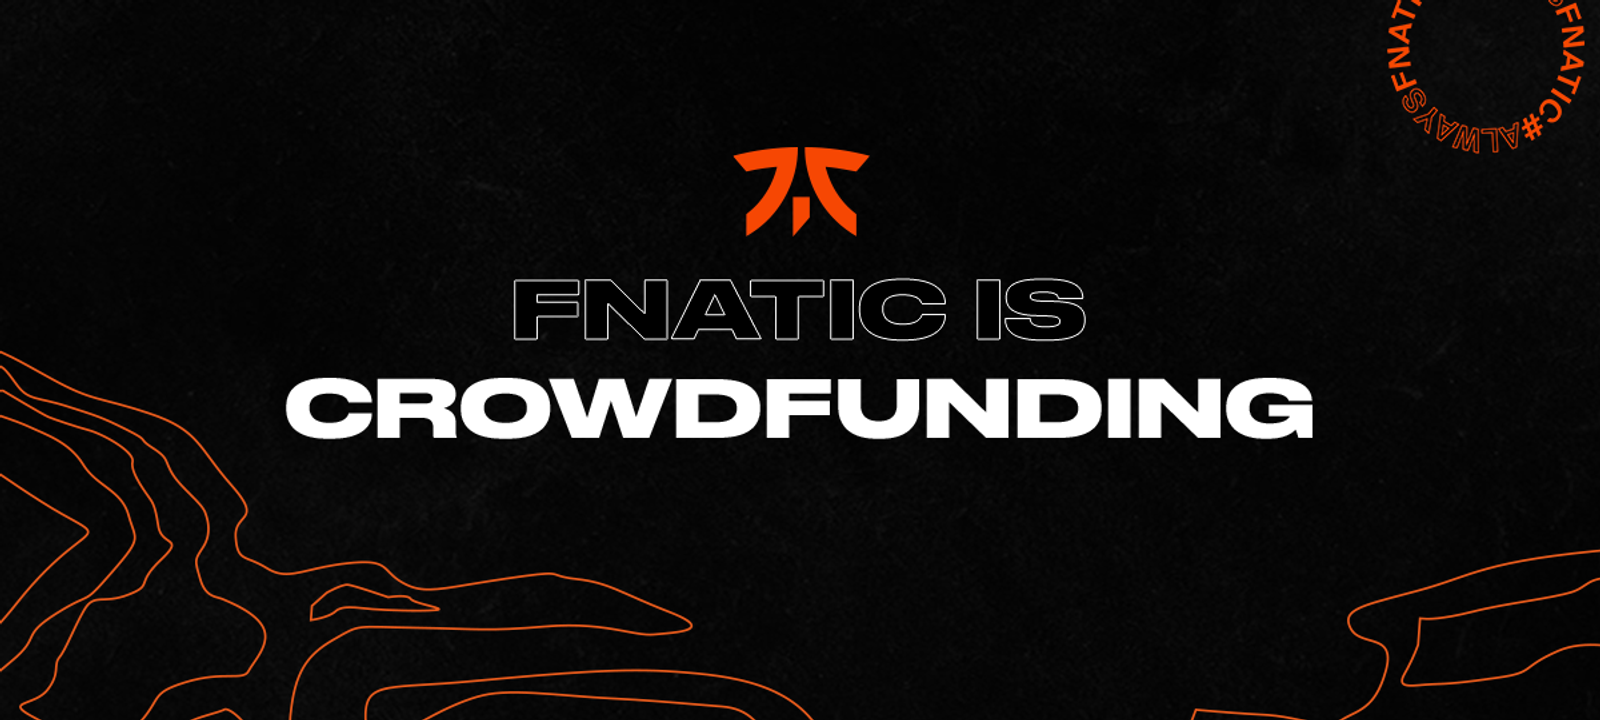 Fnatic Raises $10 Million and Launches Crowdfunding to Accelerate High-Performance Esports